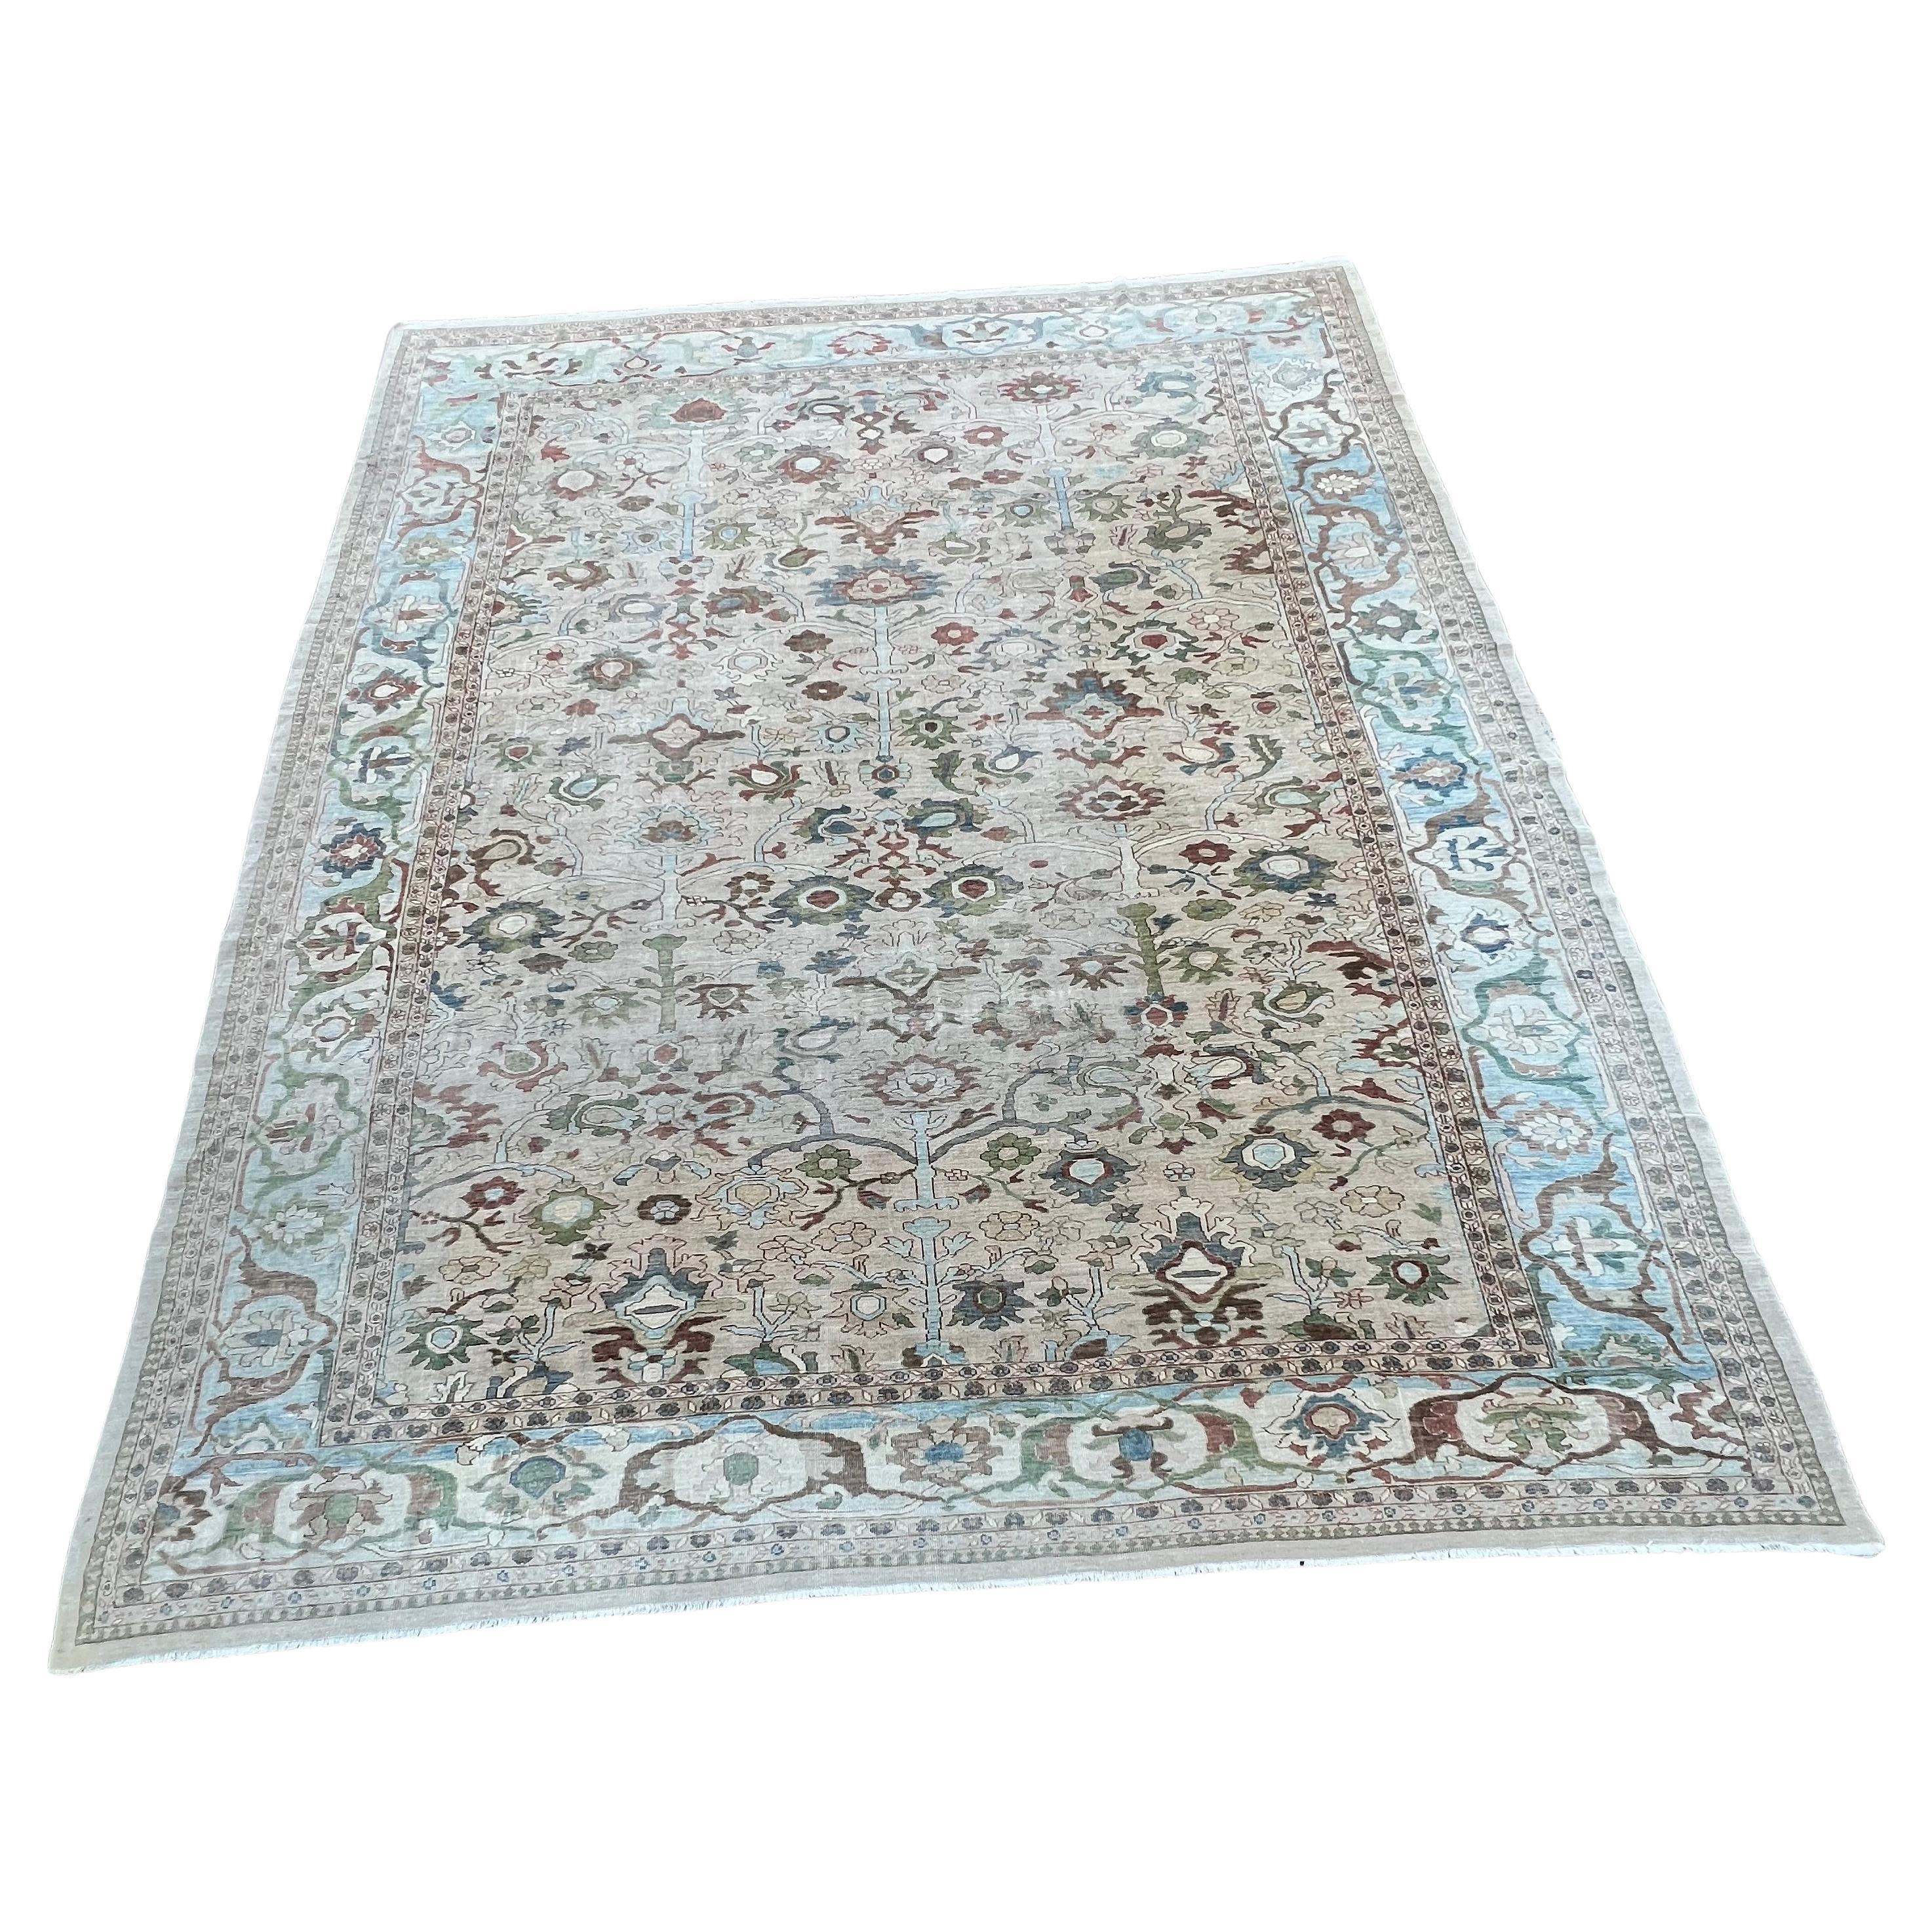 Sultana Style Rug with ivory, Sky Blue, Beige, Rust, Olive, and Camel Tones In Good Condition For Sale In Los Angeles, CA